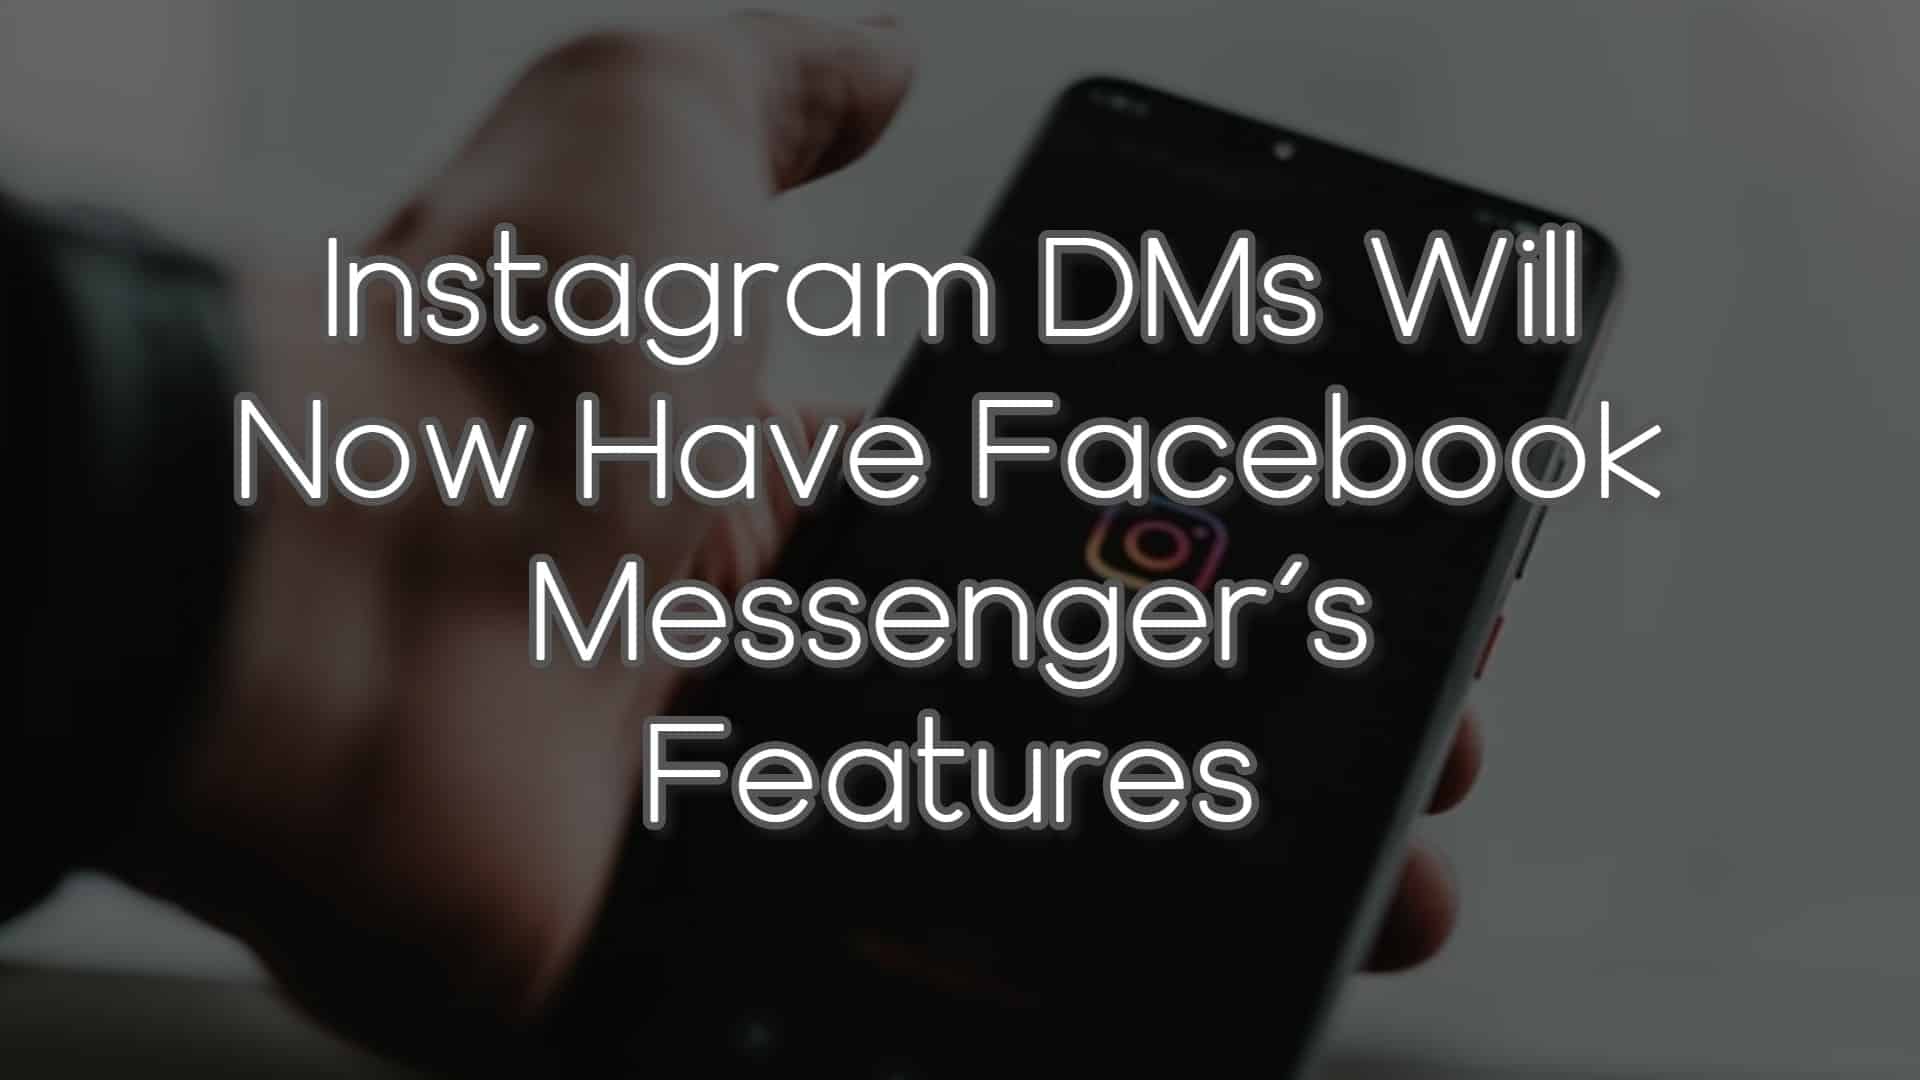 Instagram-DMs-Will-Now-Have-Facebook-Messengers-Features.jpg